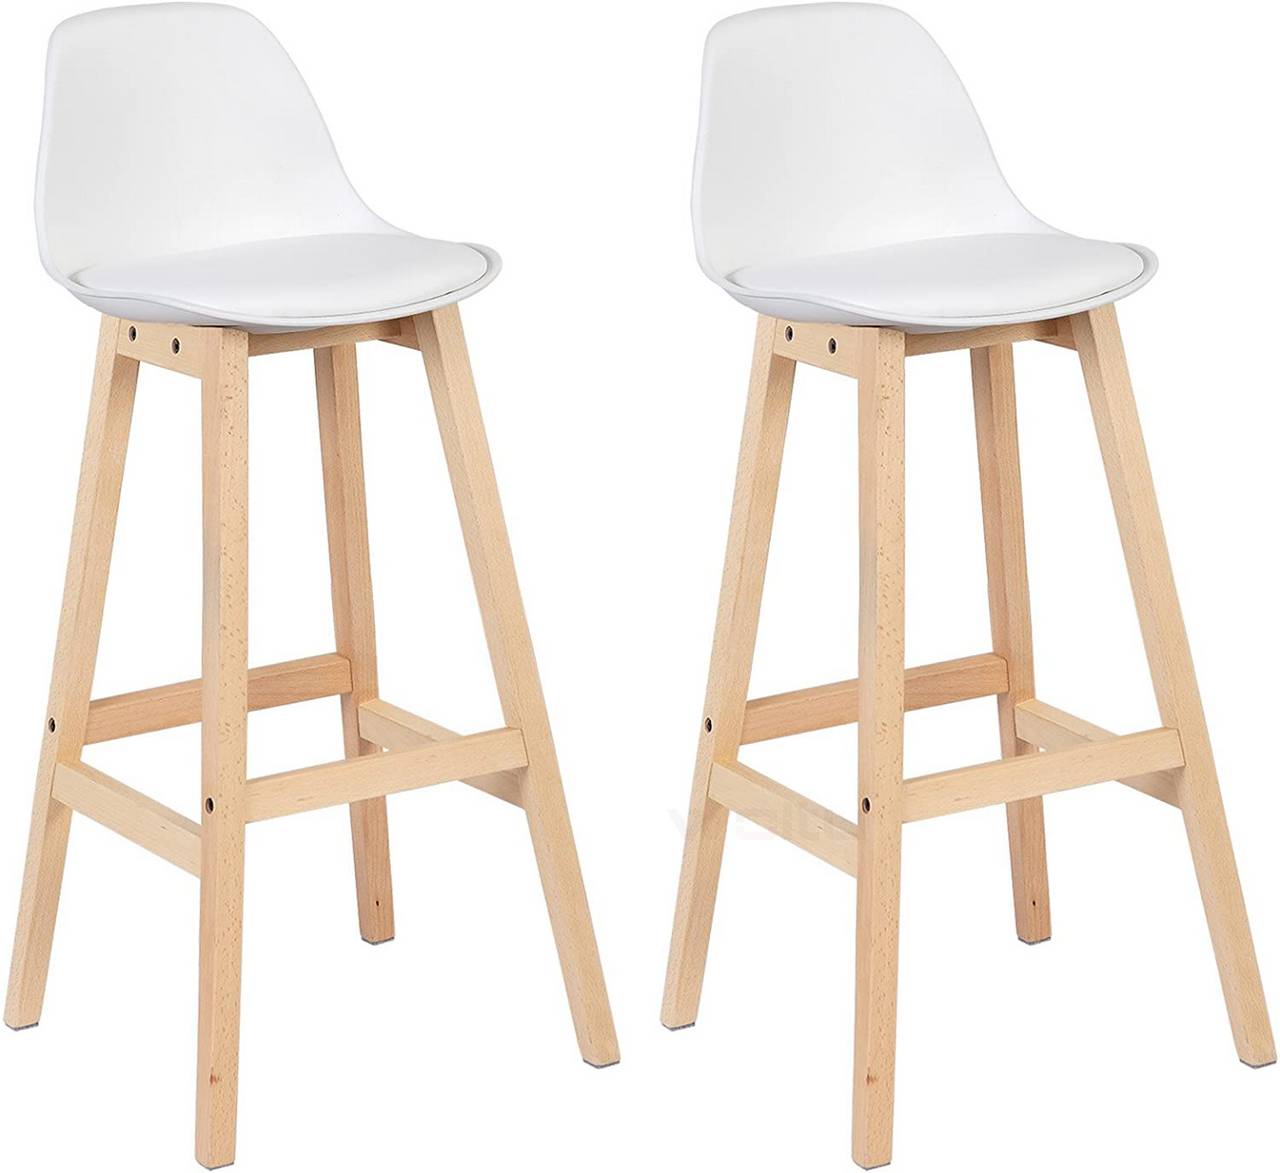 Breakfast Kitchen Counter Chairs Bar Stools Set Of 2